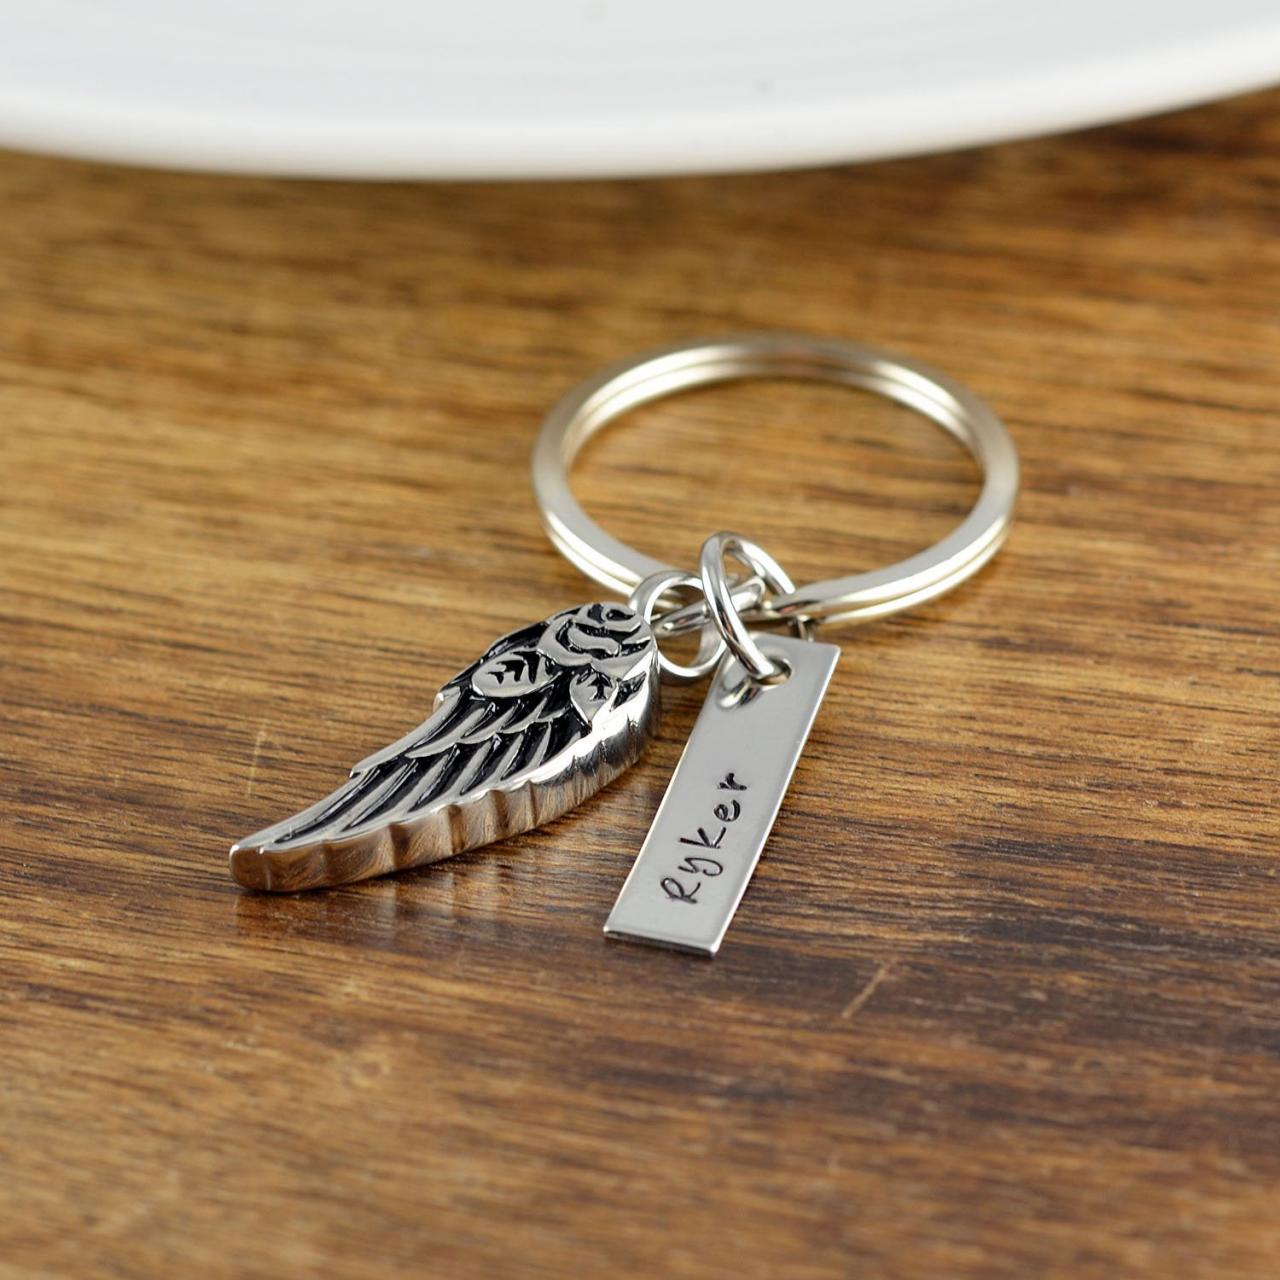 Angel Wing Keychain, Personalized Memorial Keychain, Remembrance Jewelry, In Memory Of, Grief Gift, Sympathy Gift, Loss Of Mother, Father